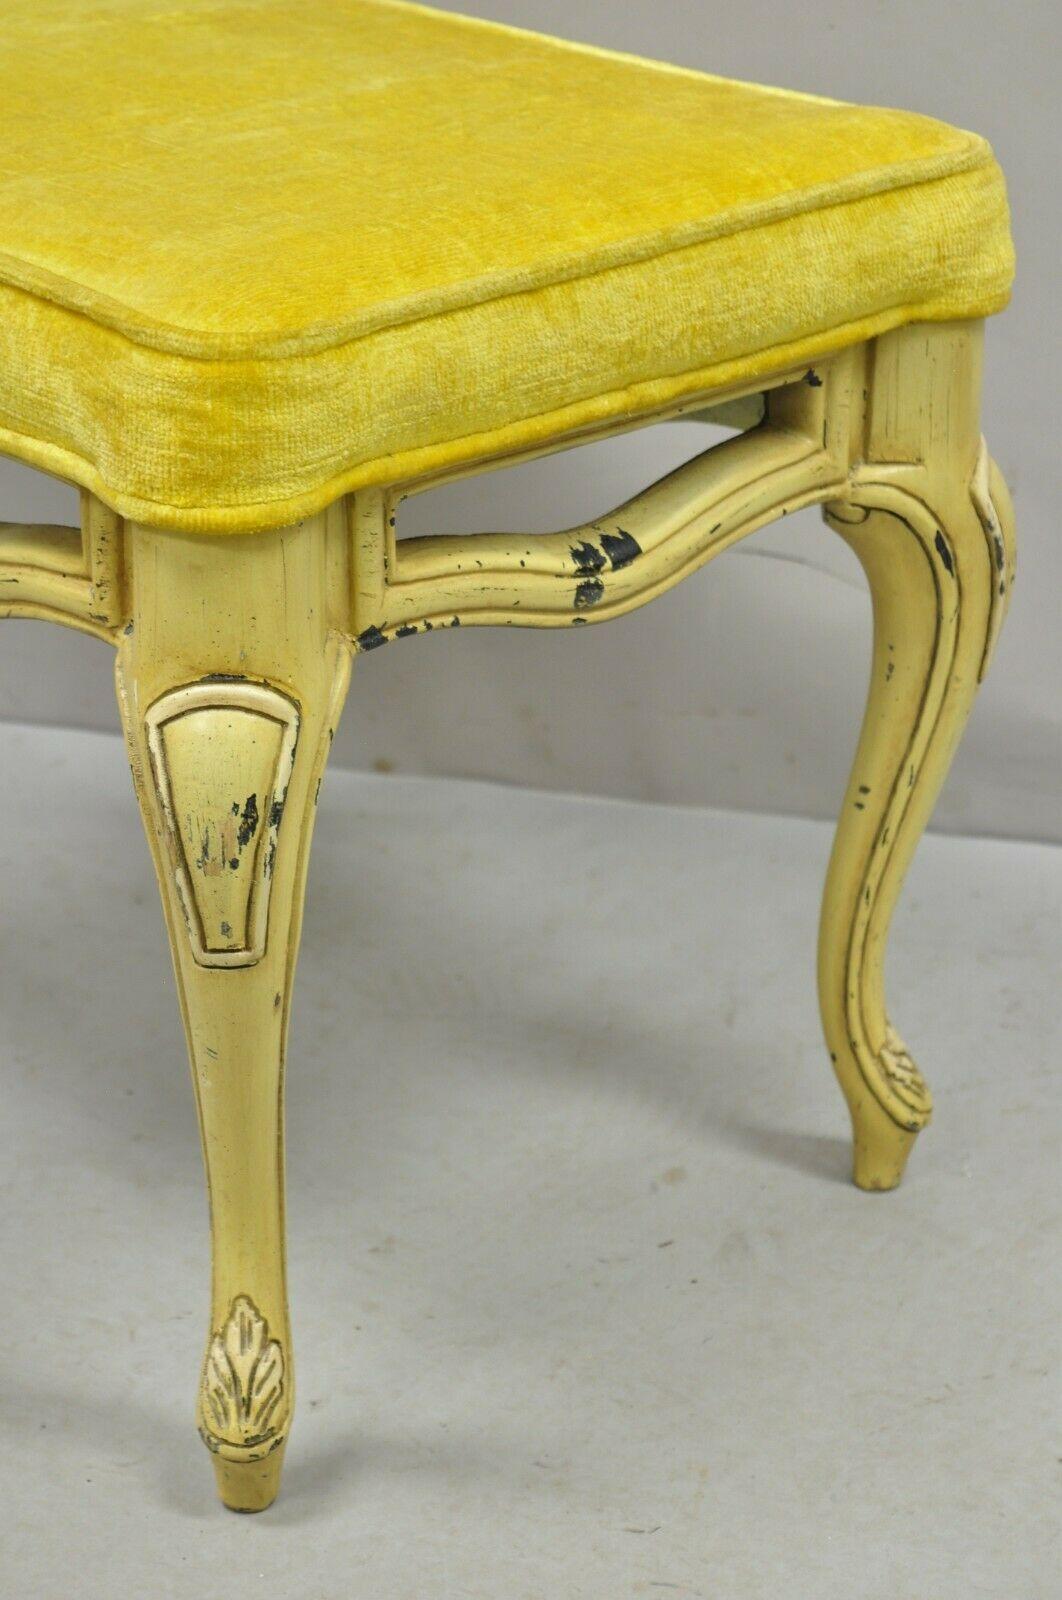 Vintage French Provincial Yellow Painted Cabriole Leg Vanity Bench Seat In Good Condition For Sale In Philadelphia, PA